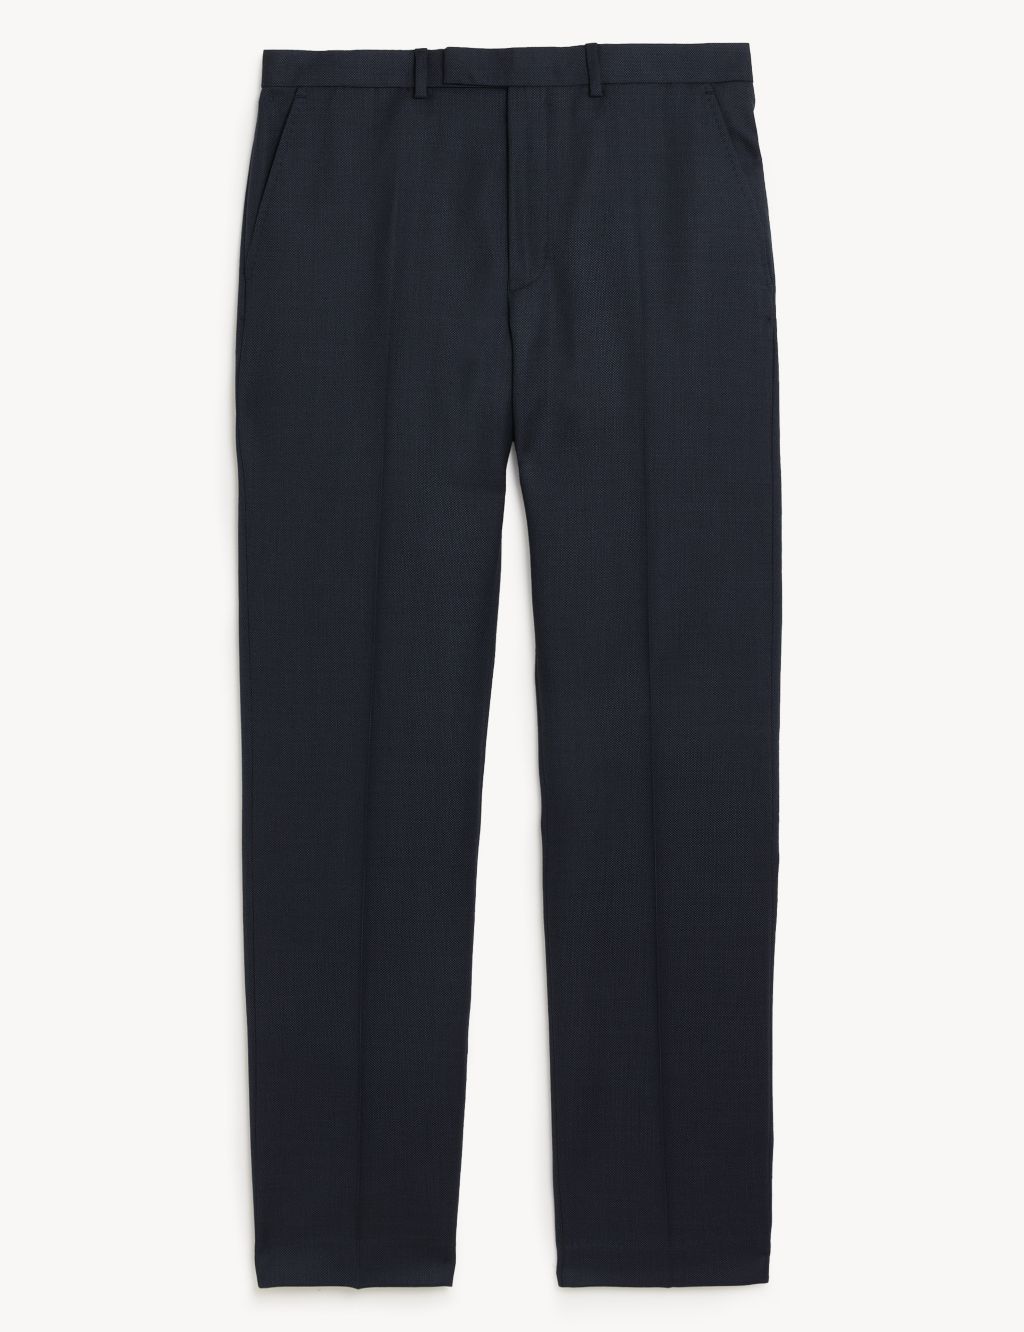 Regular Fit Pure Wool Suit Trousers image 1